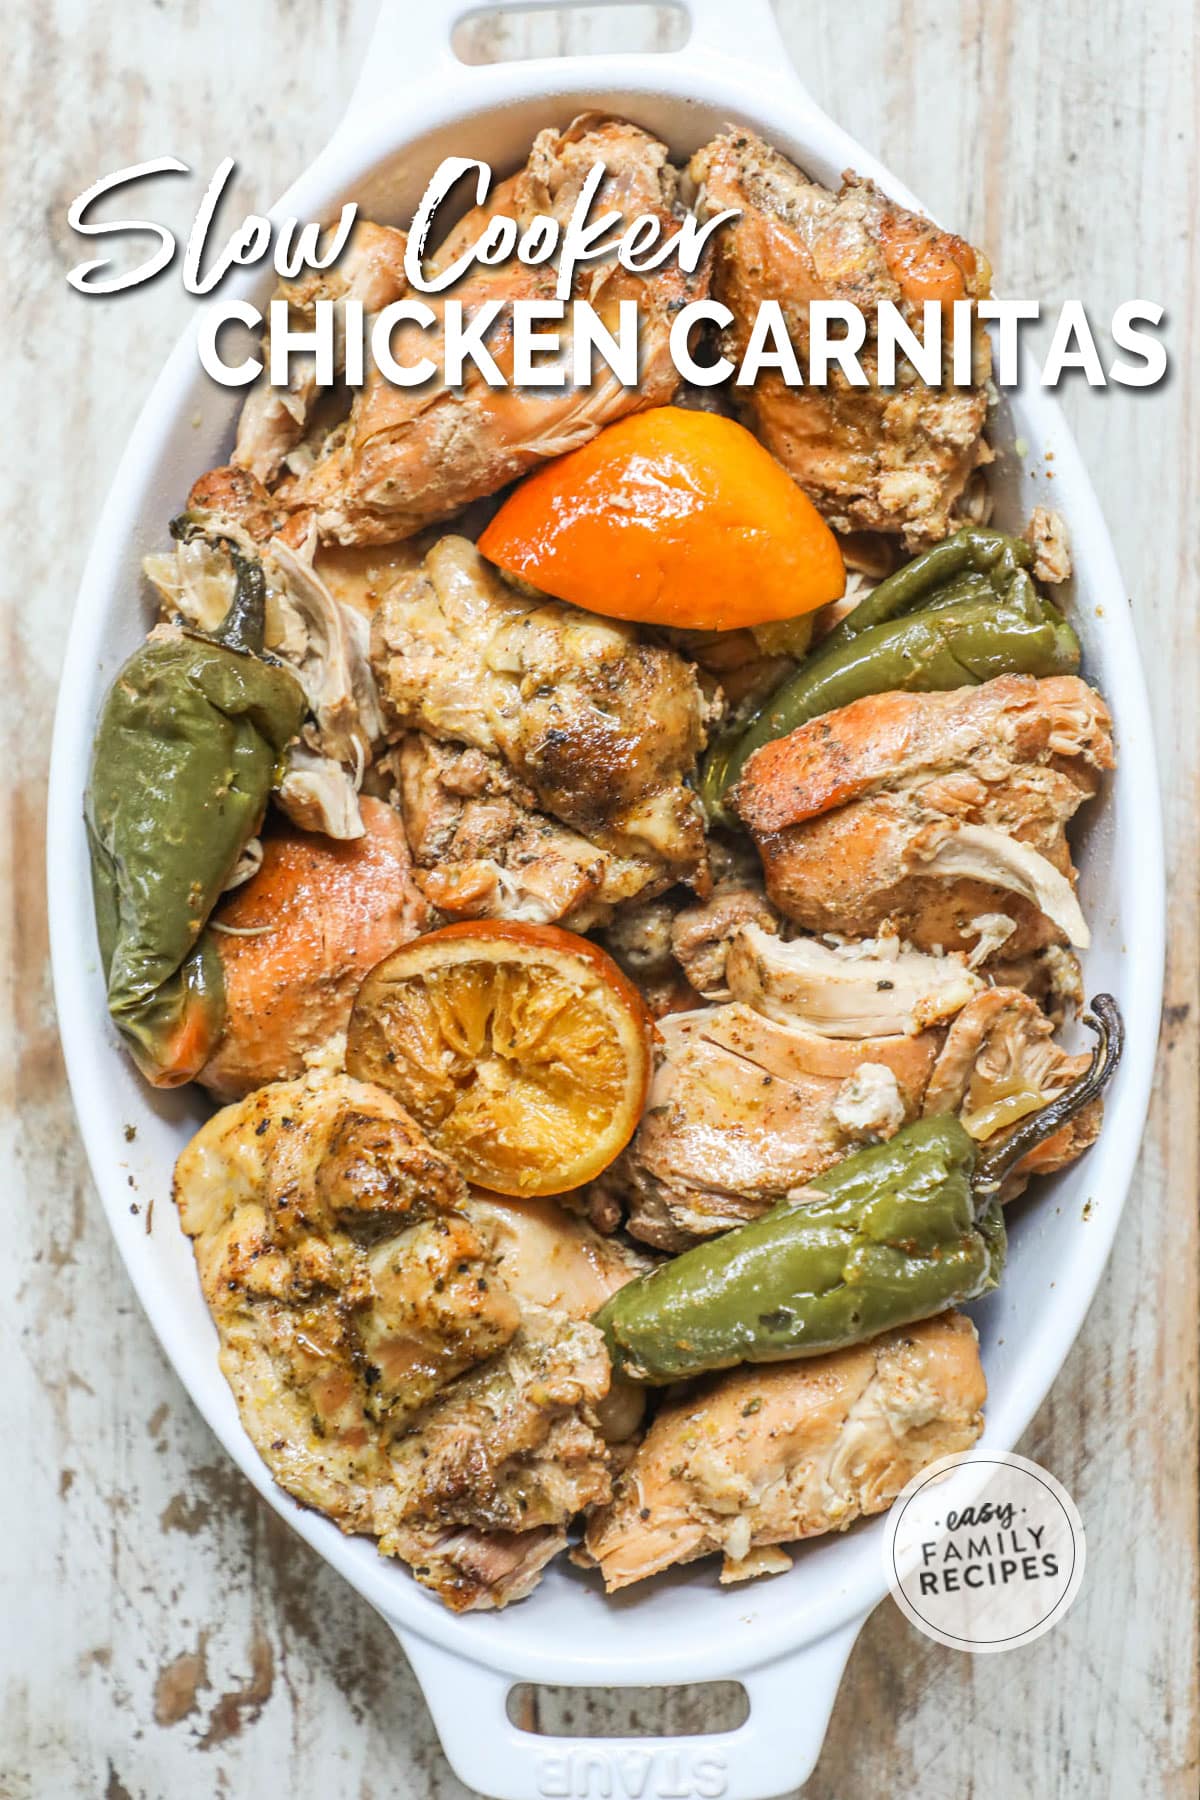 a serving dish filled with chicken carnitas, oranges, and jalapeños